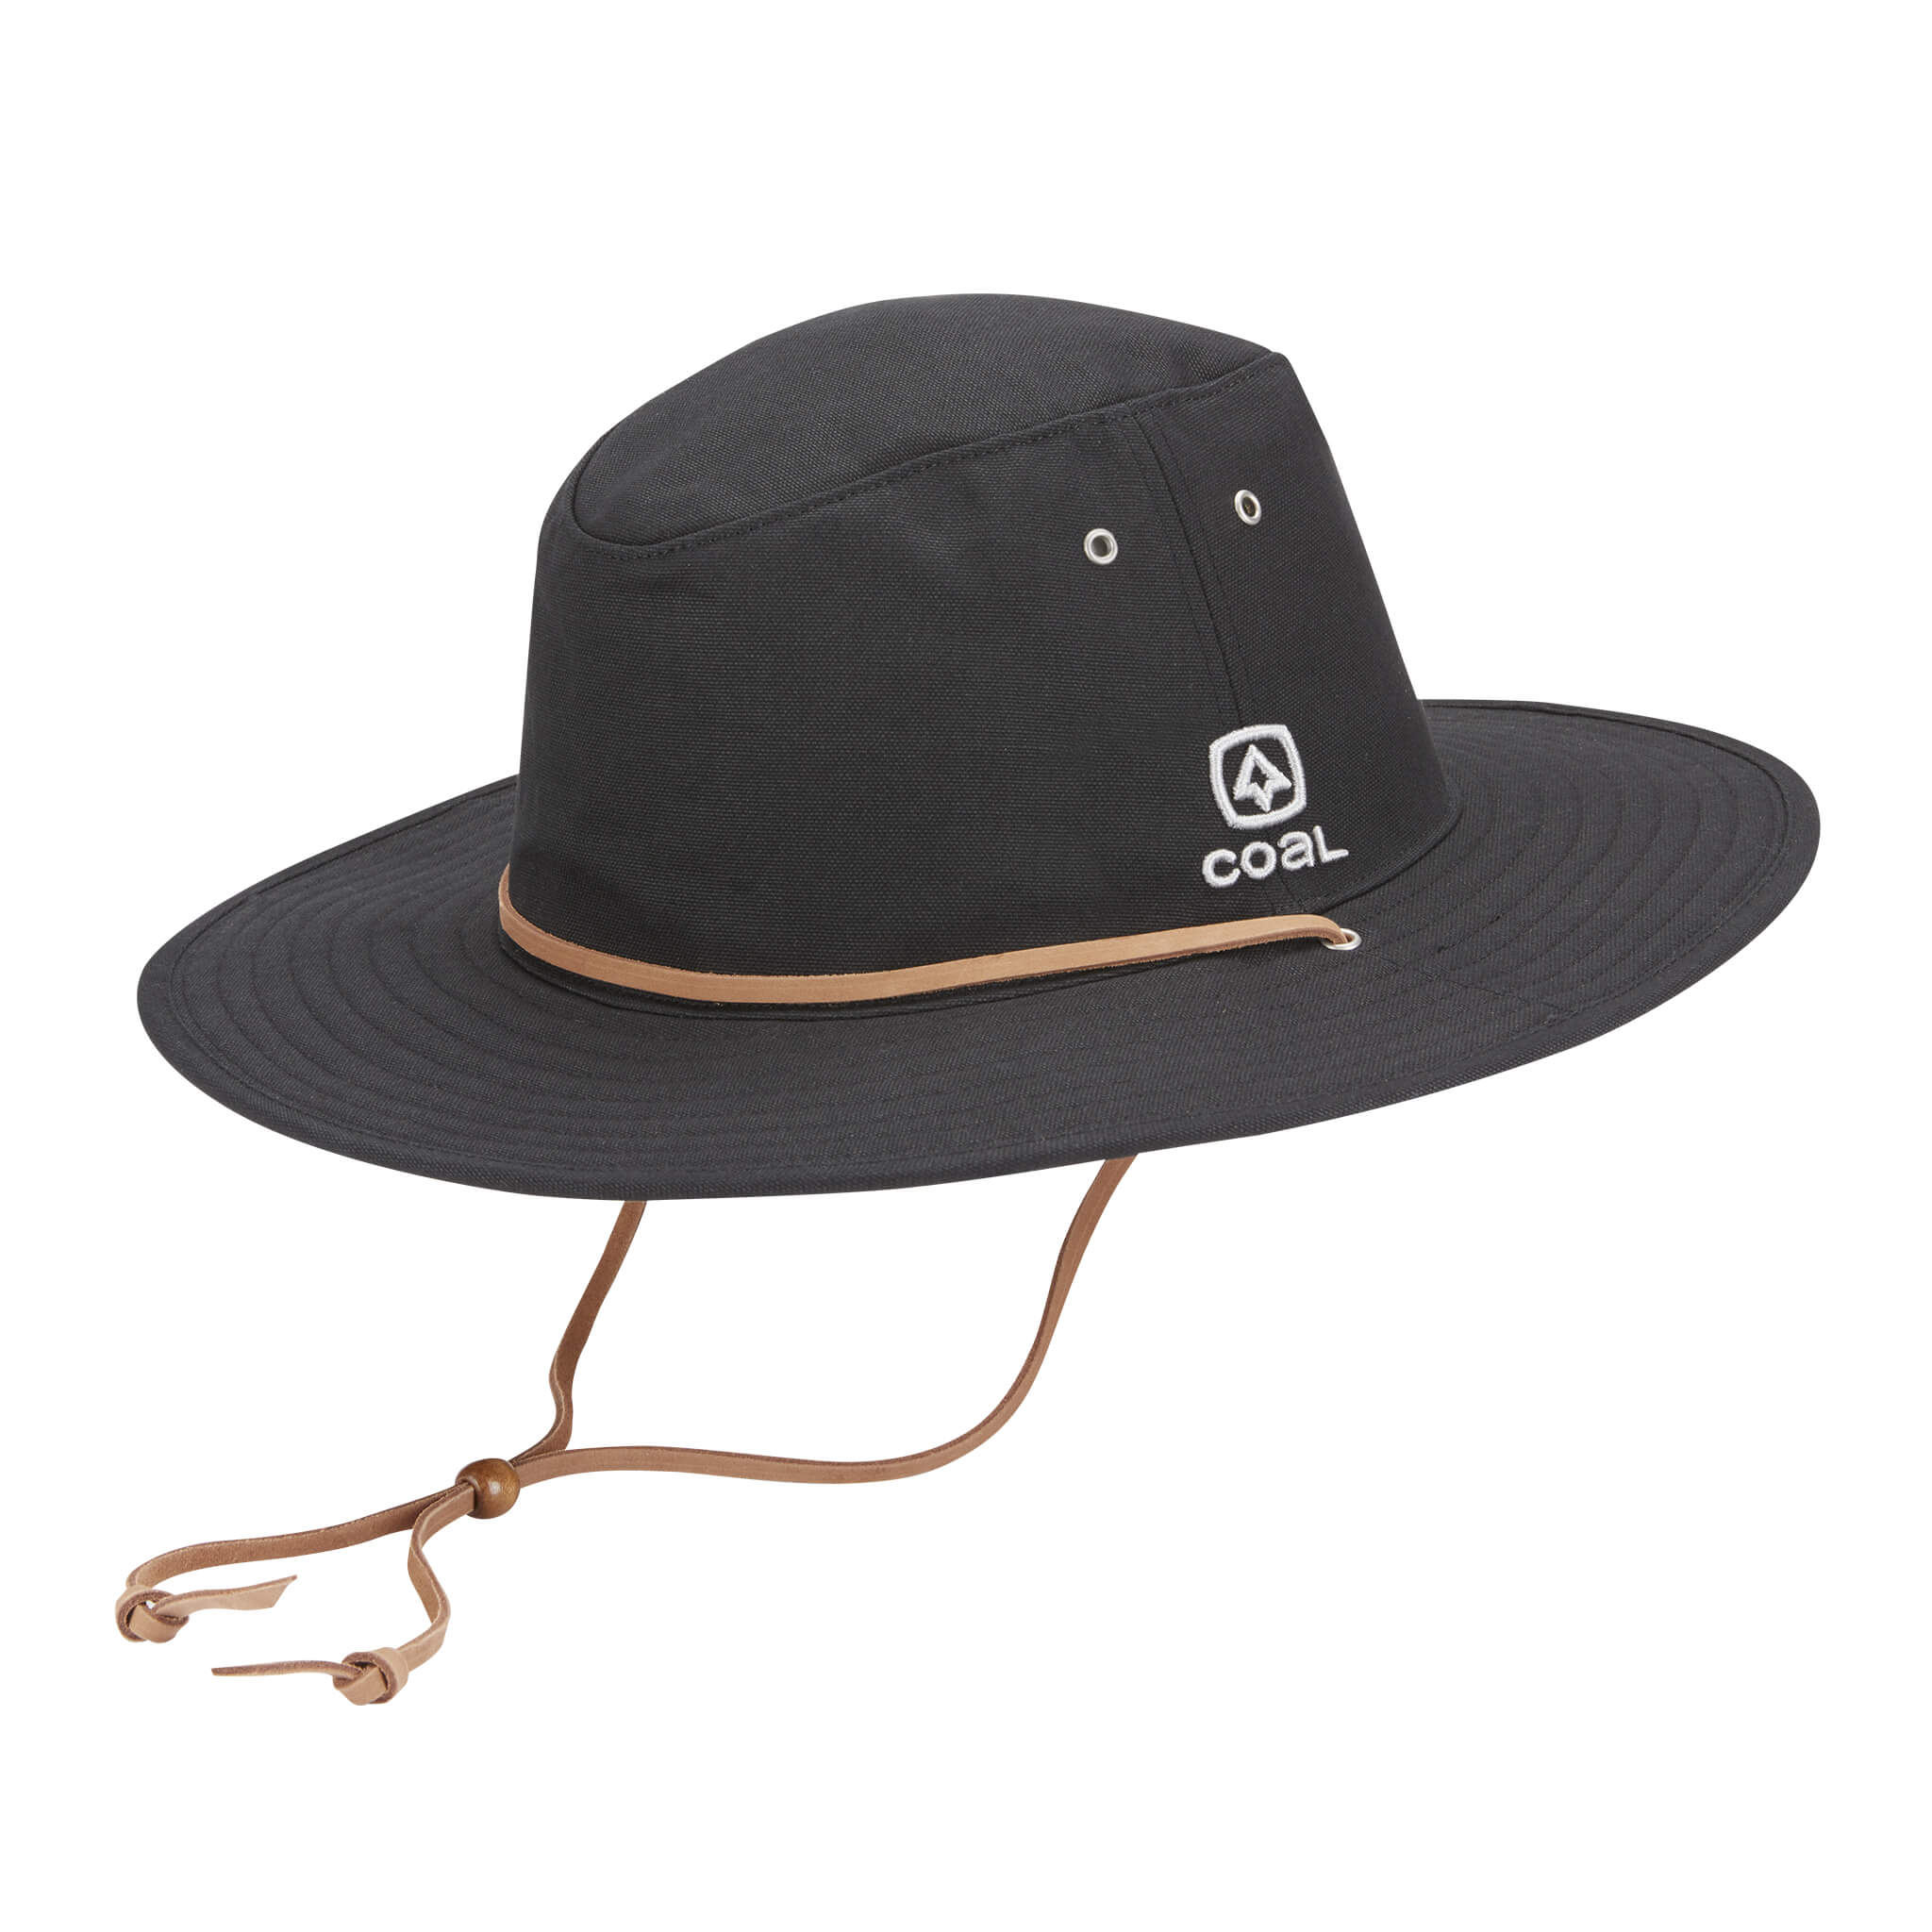 Coal The Townsend Travel Hat - Black